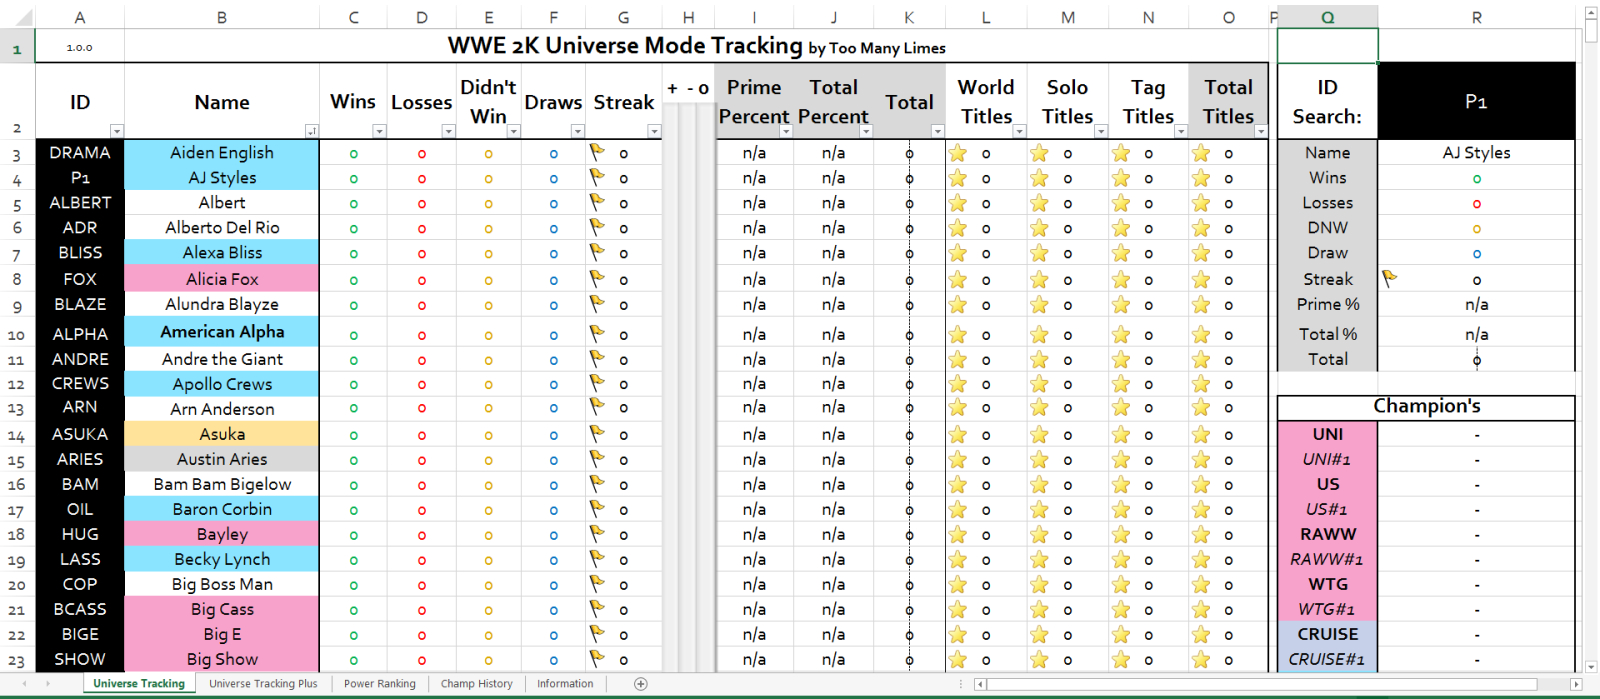 Wwe Supercard Stats Spreadsheet Intended For 2K Universe Mode Trackertoo Many Limes  Wwe2K17 General Chat